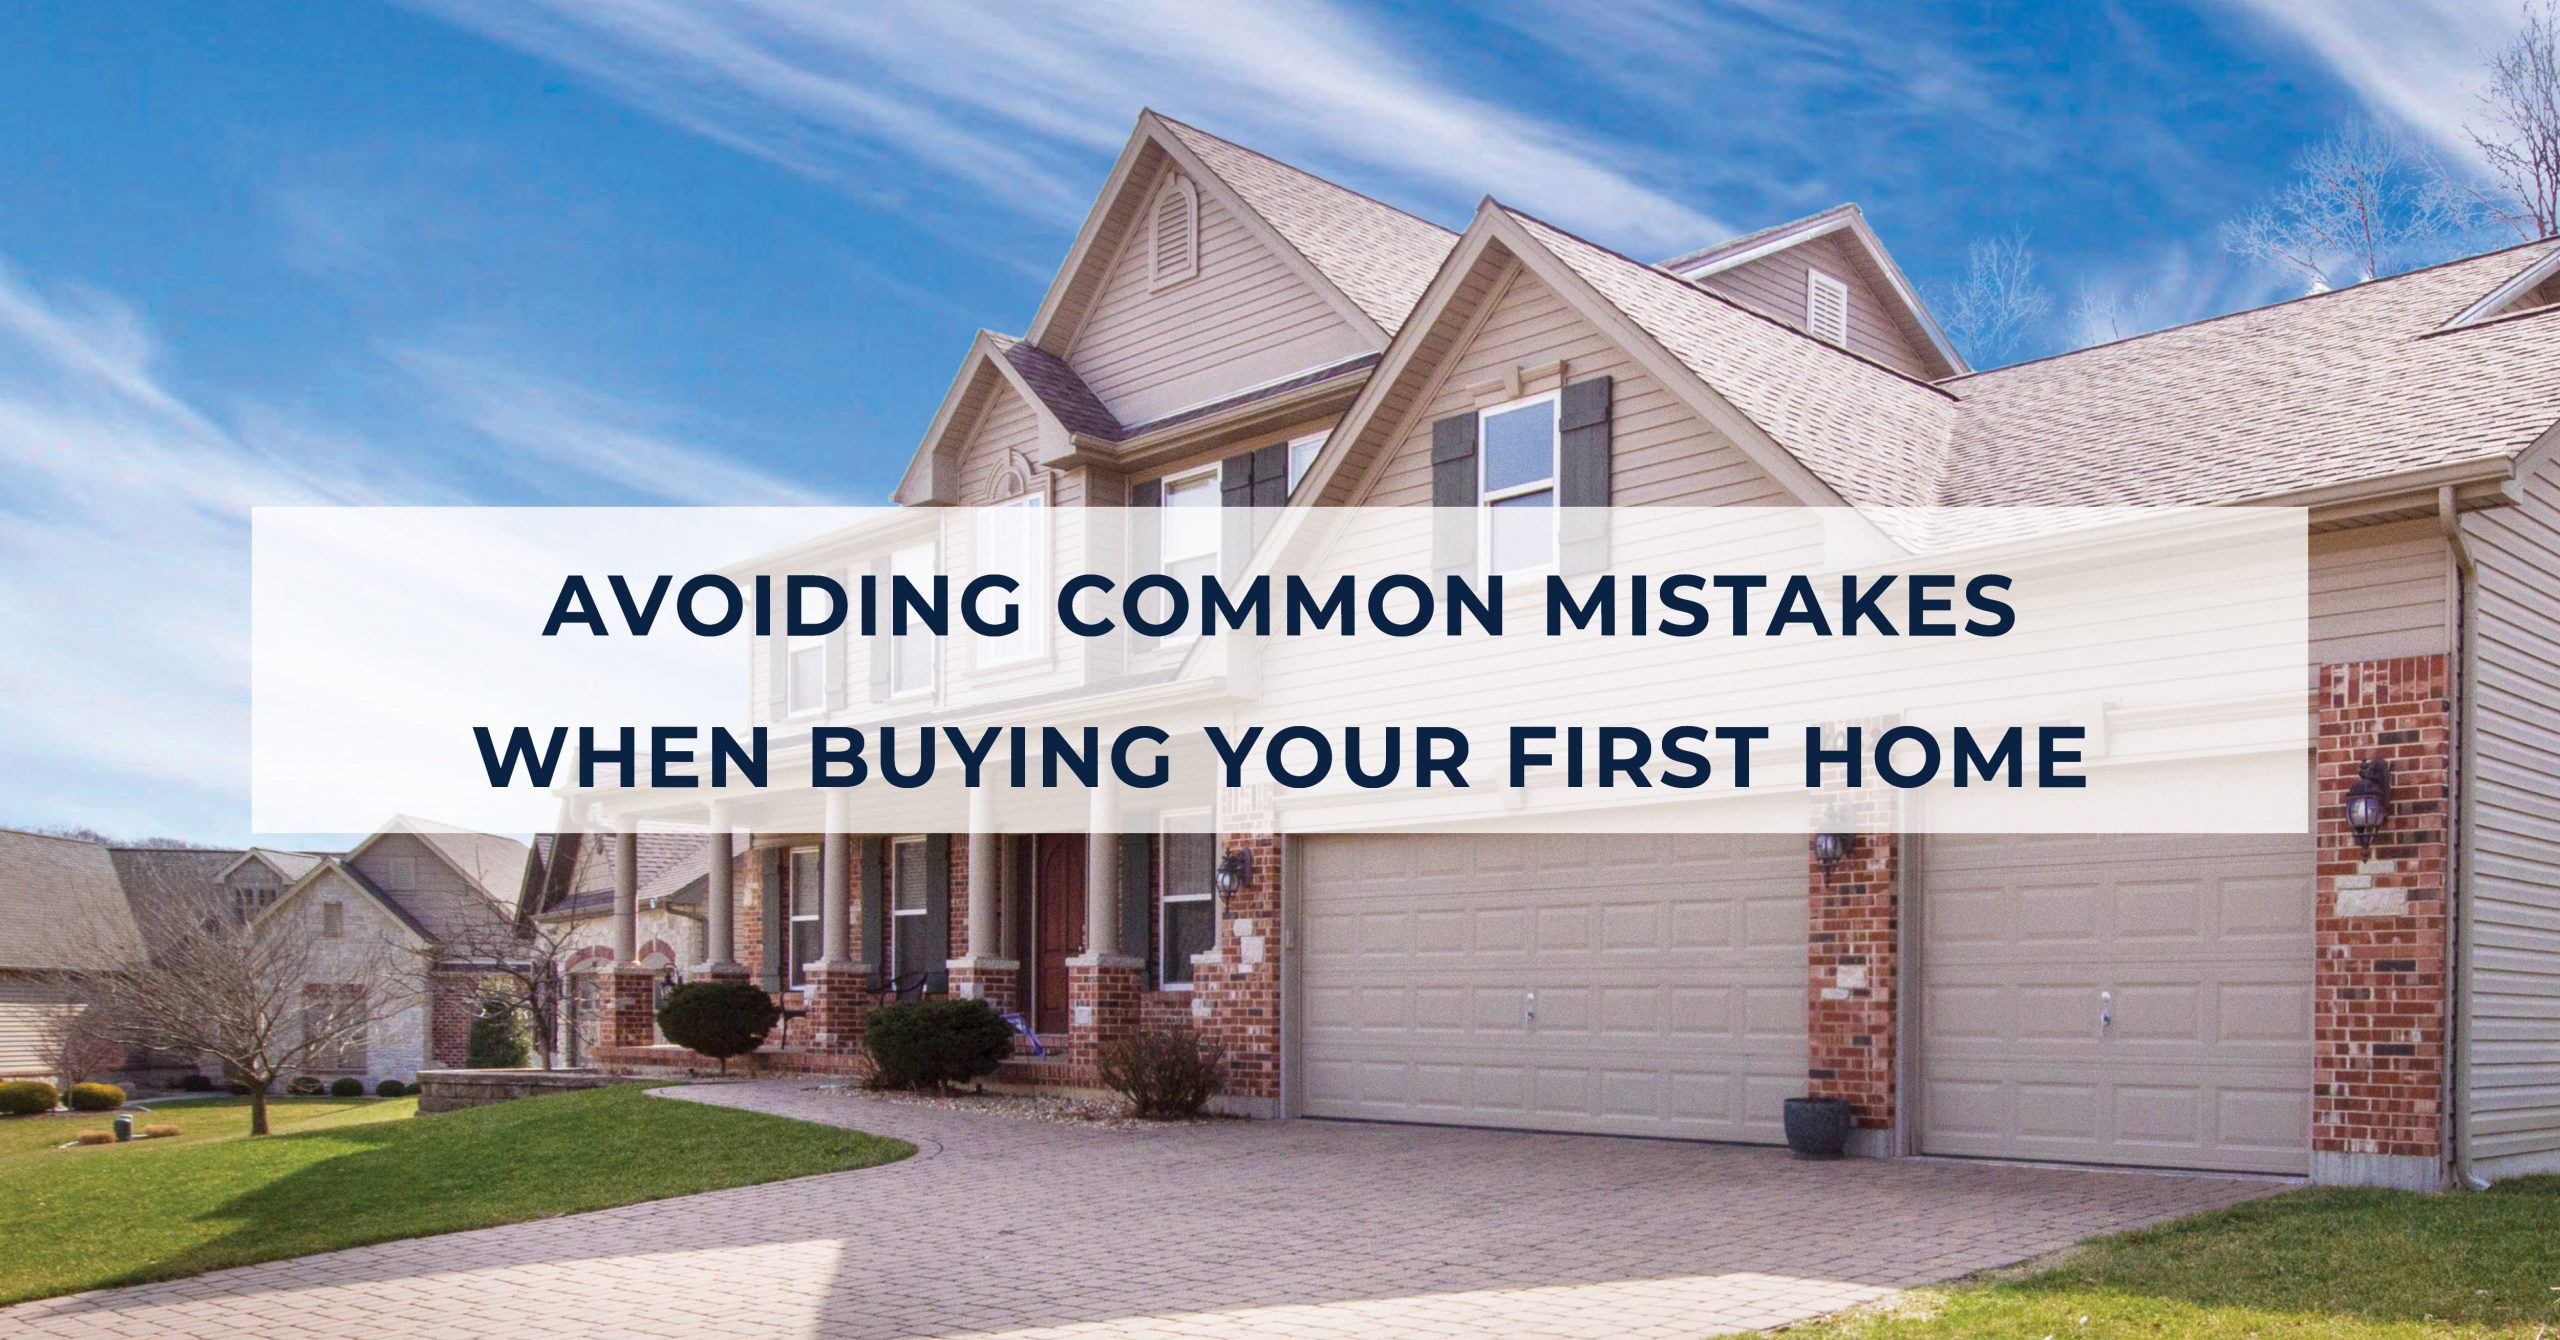 Avoiding Common Mistakes When Buying Your First Home